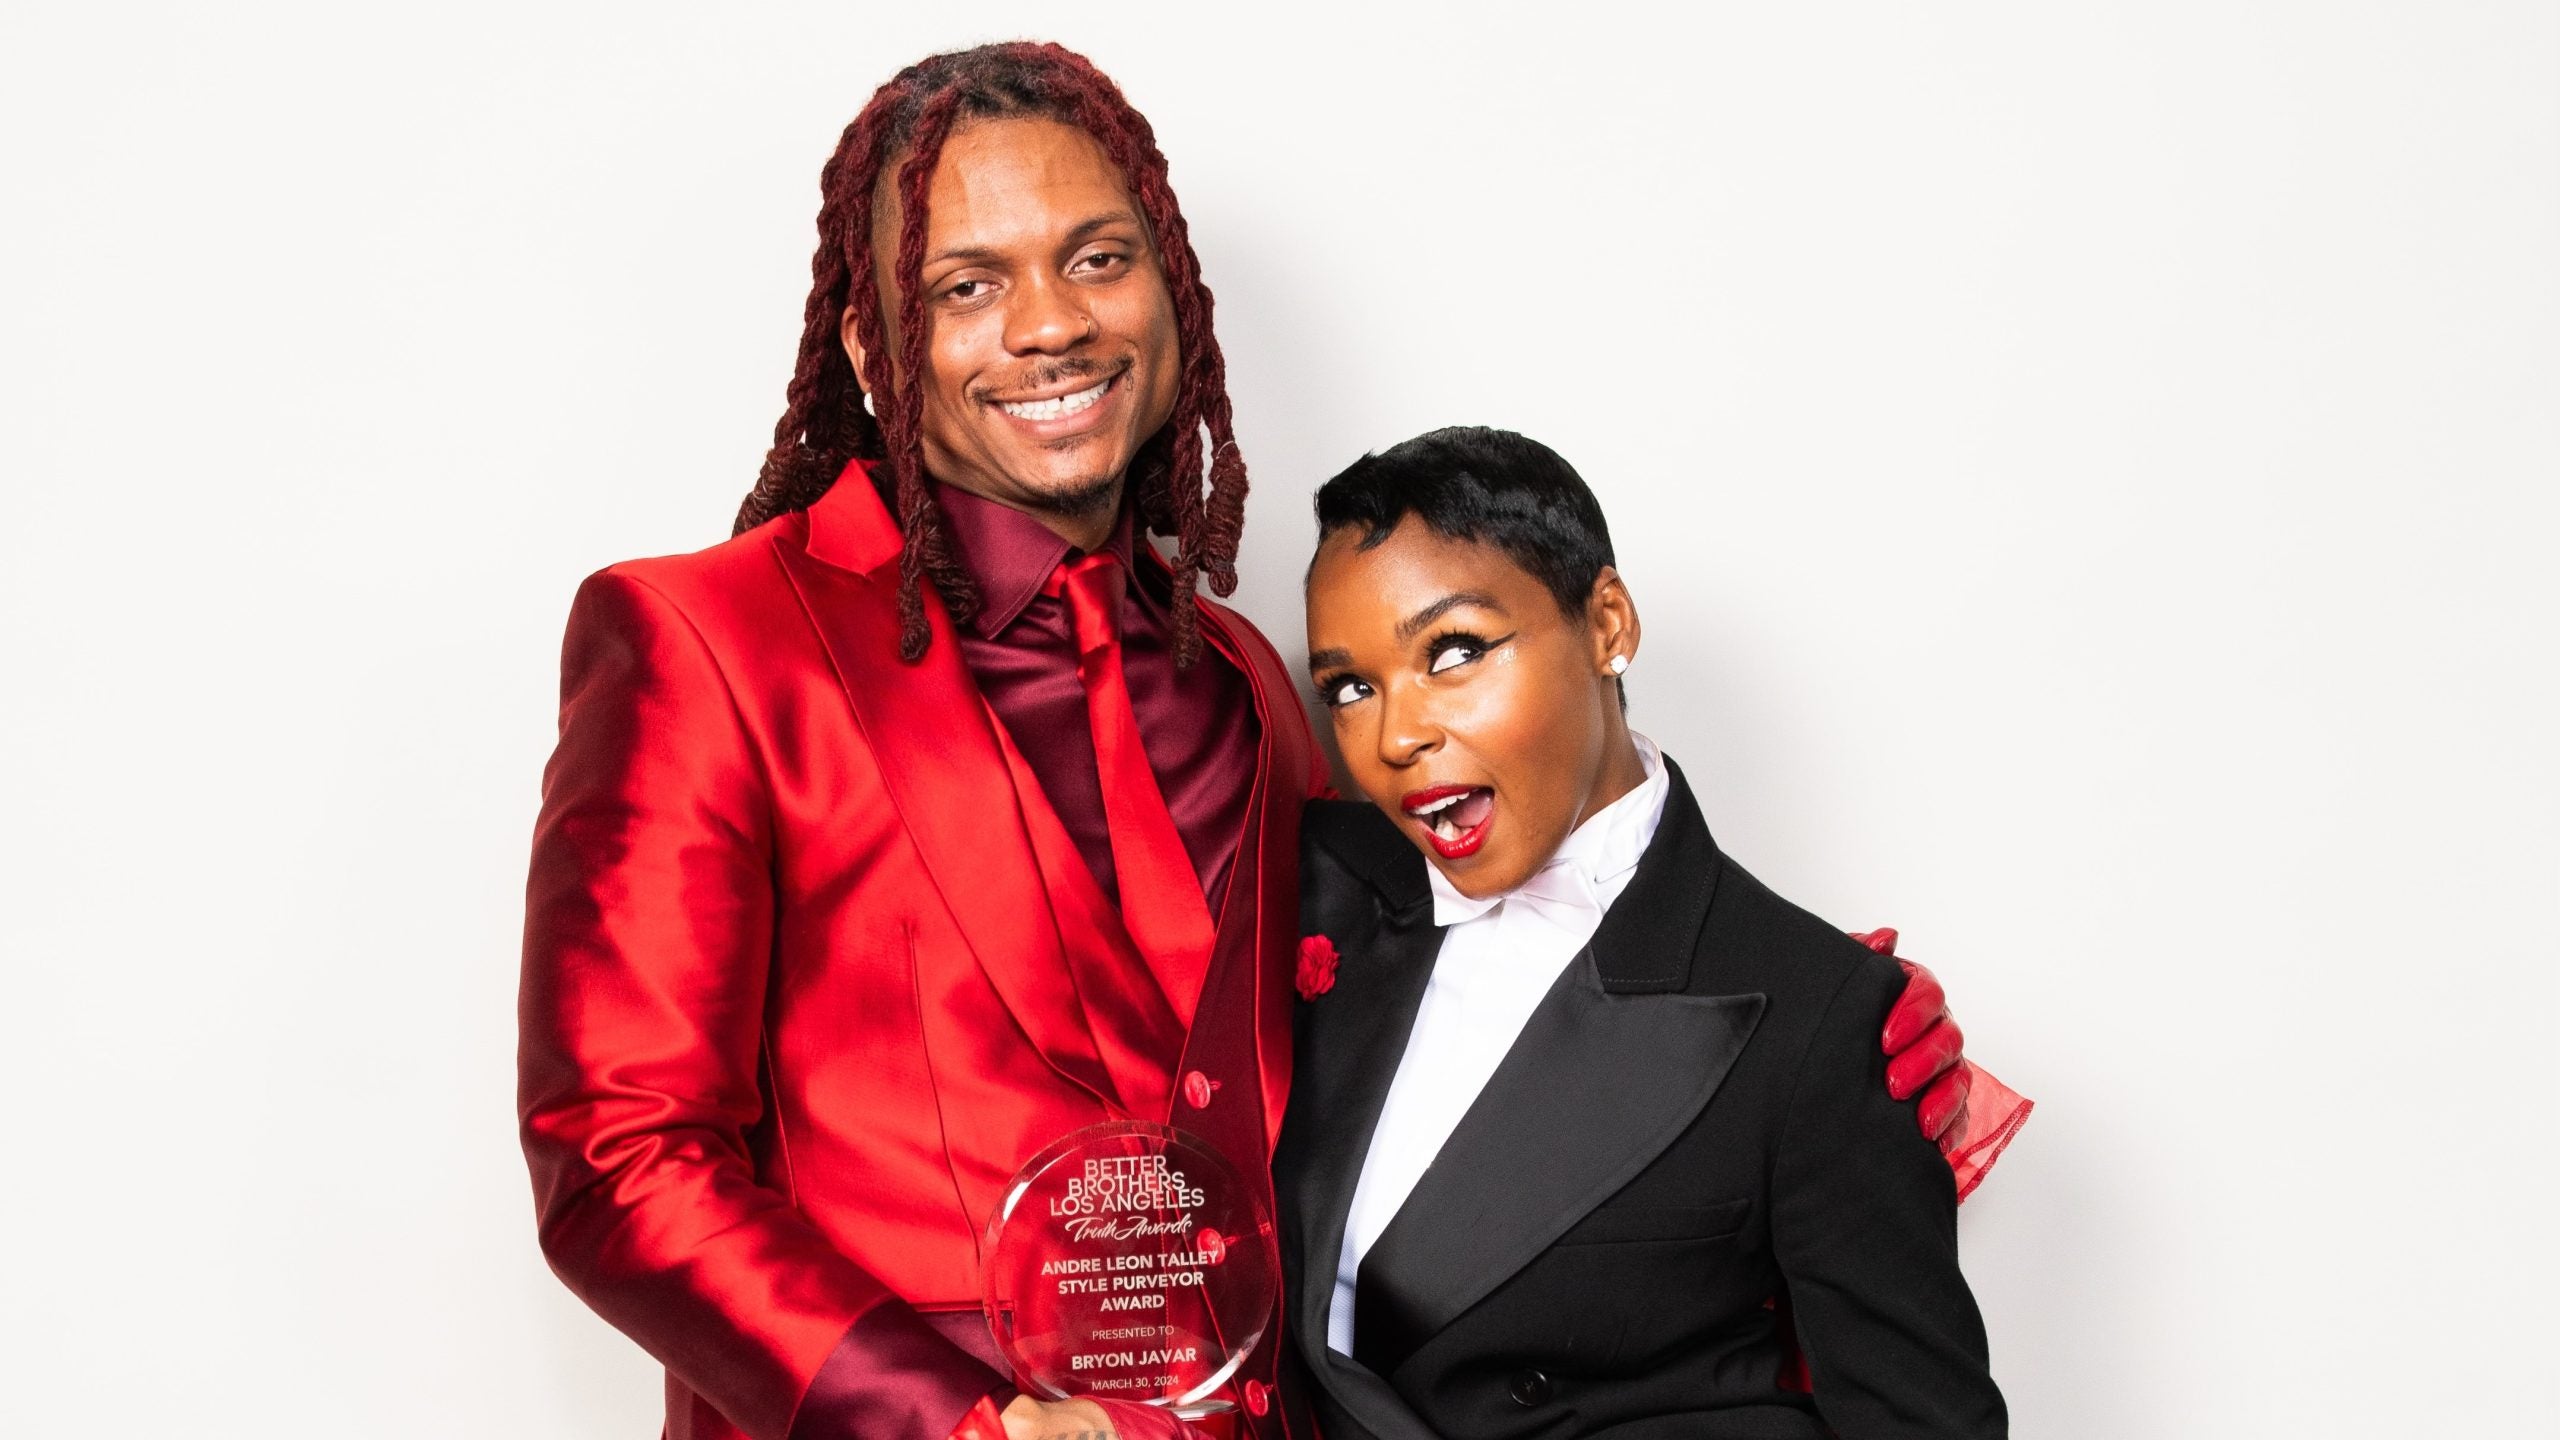 Celebrity Stylist Bryon Javar On His Career And Winning The André Leon Talley Award